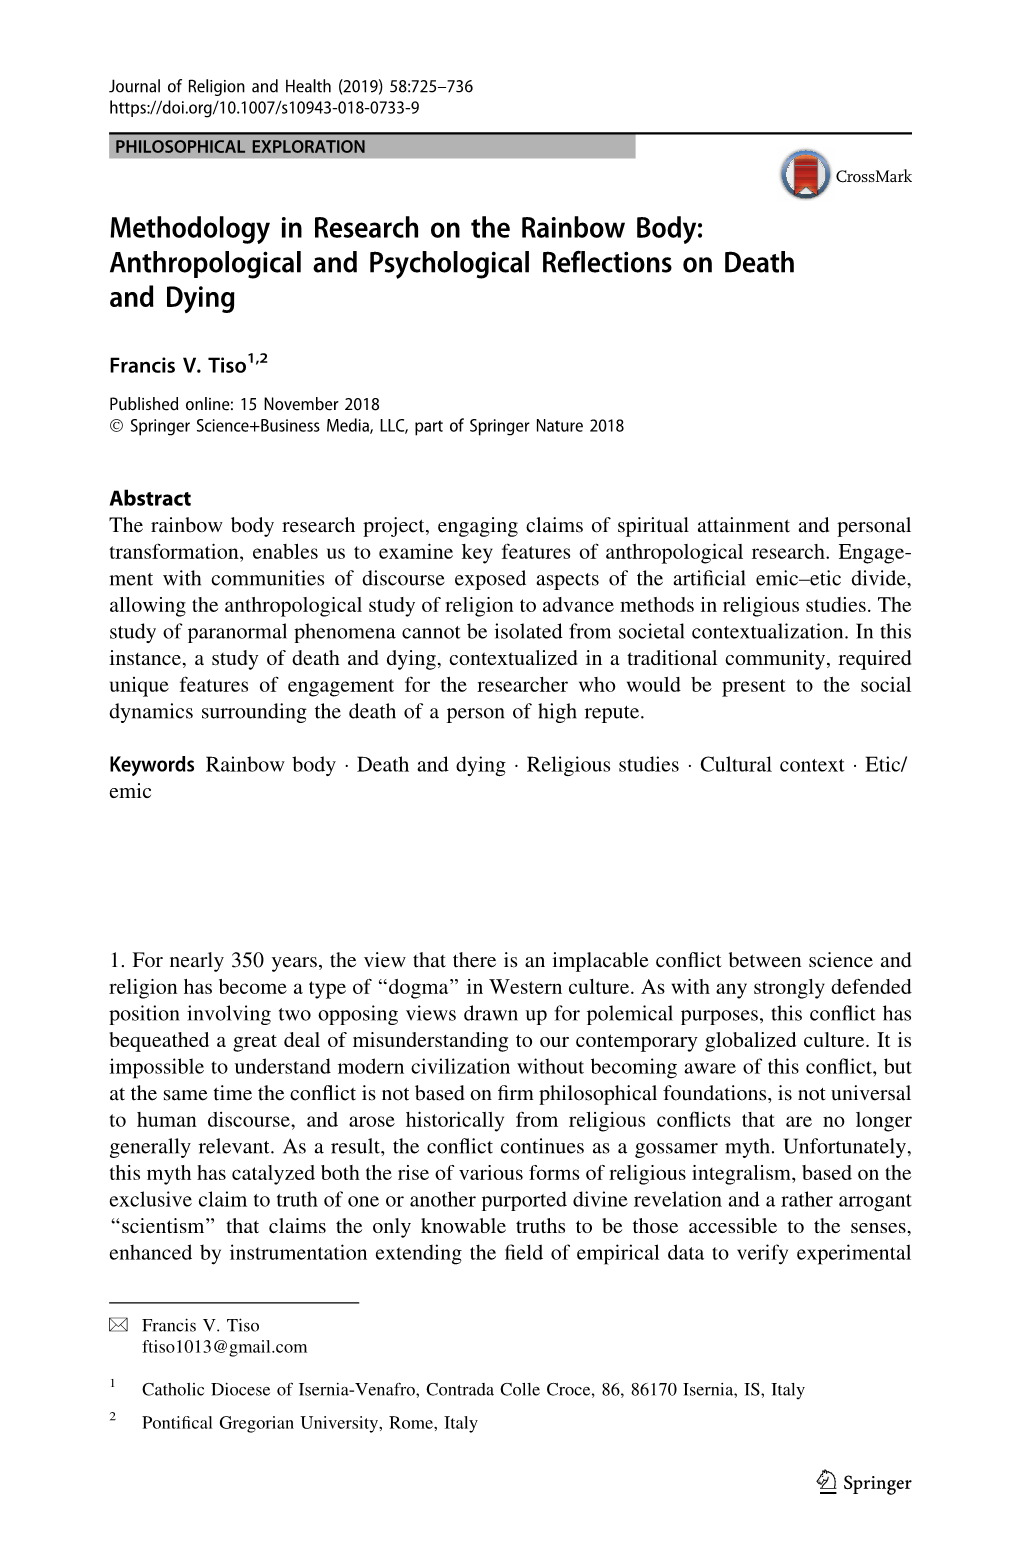 Methodology in Research on the Rainbow Body: Anthropological and Psychological Reflections on Death and Dying